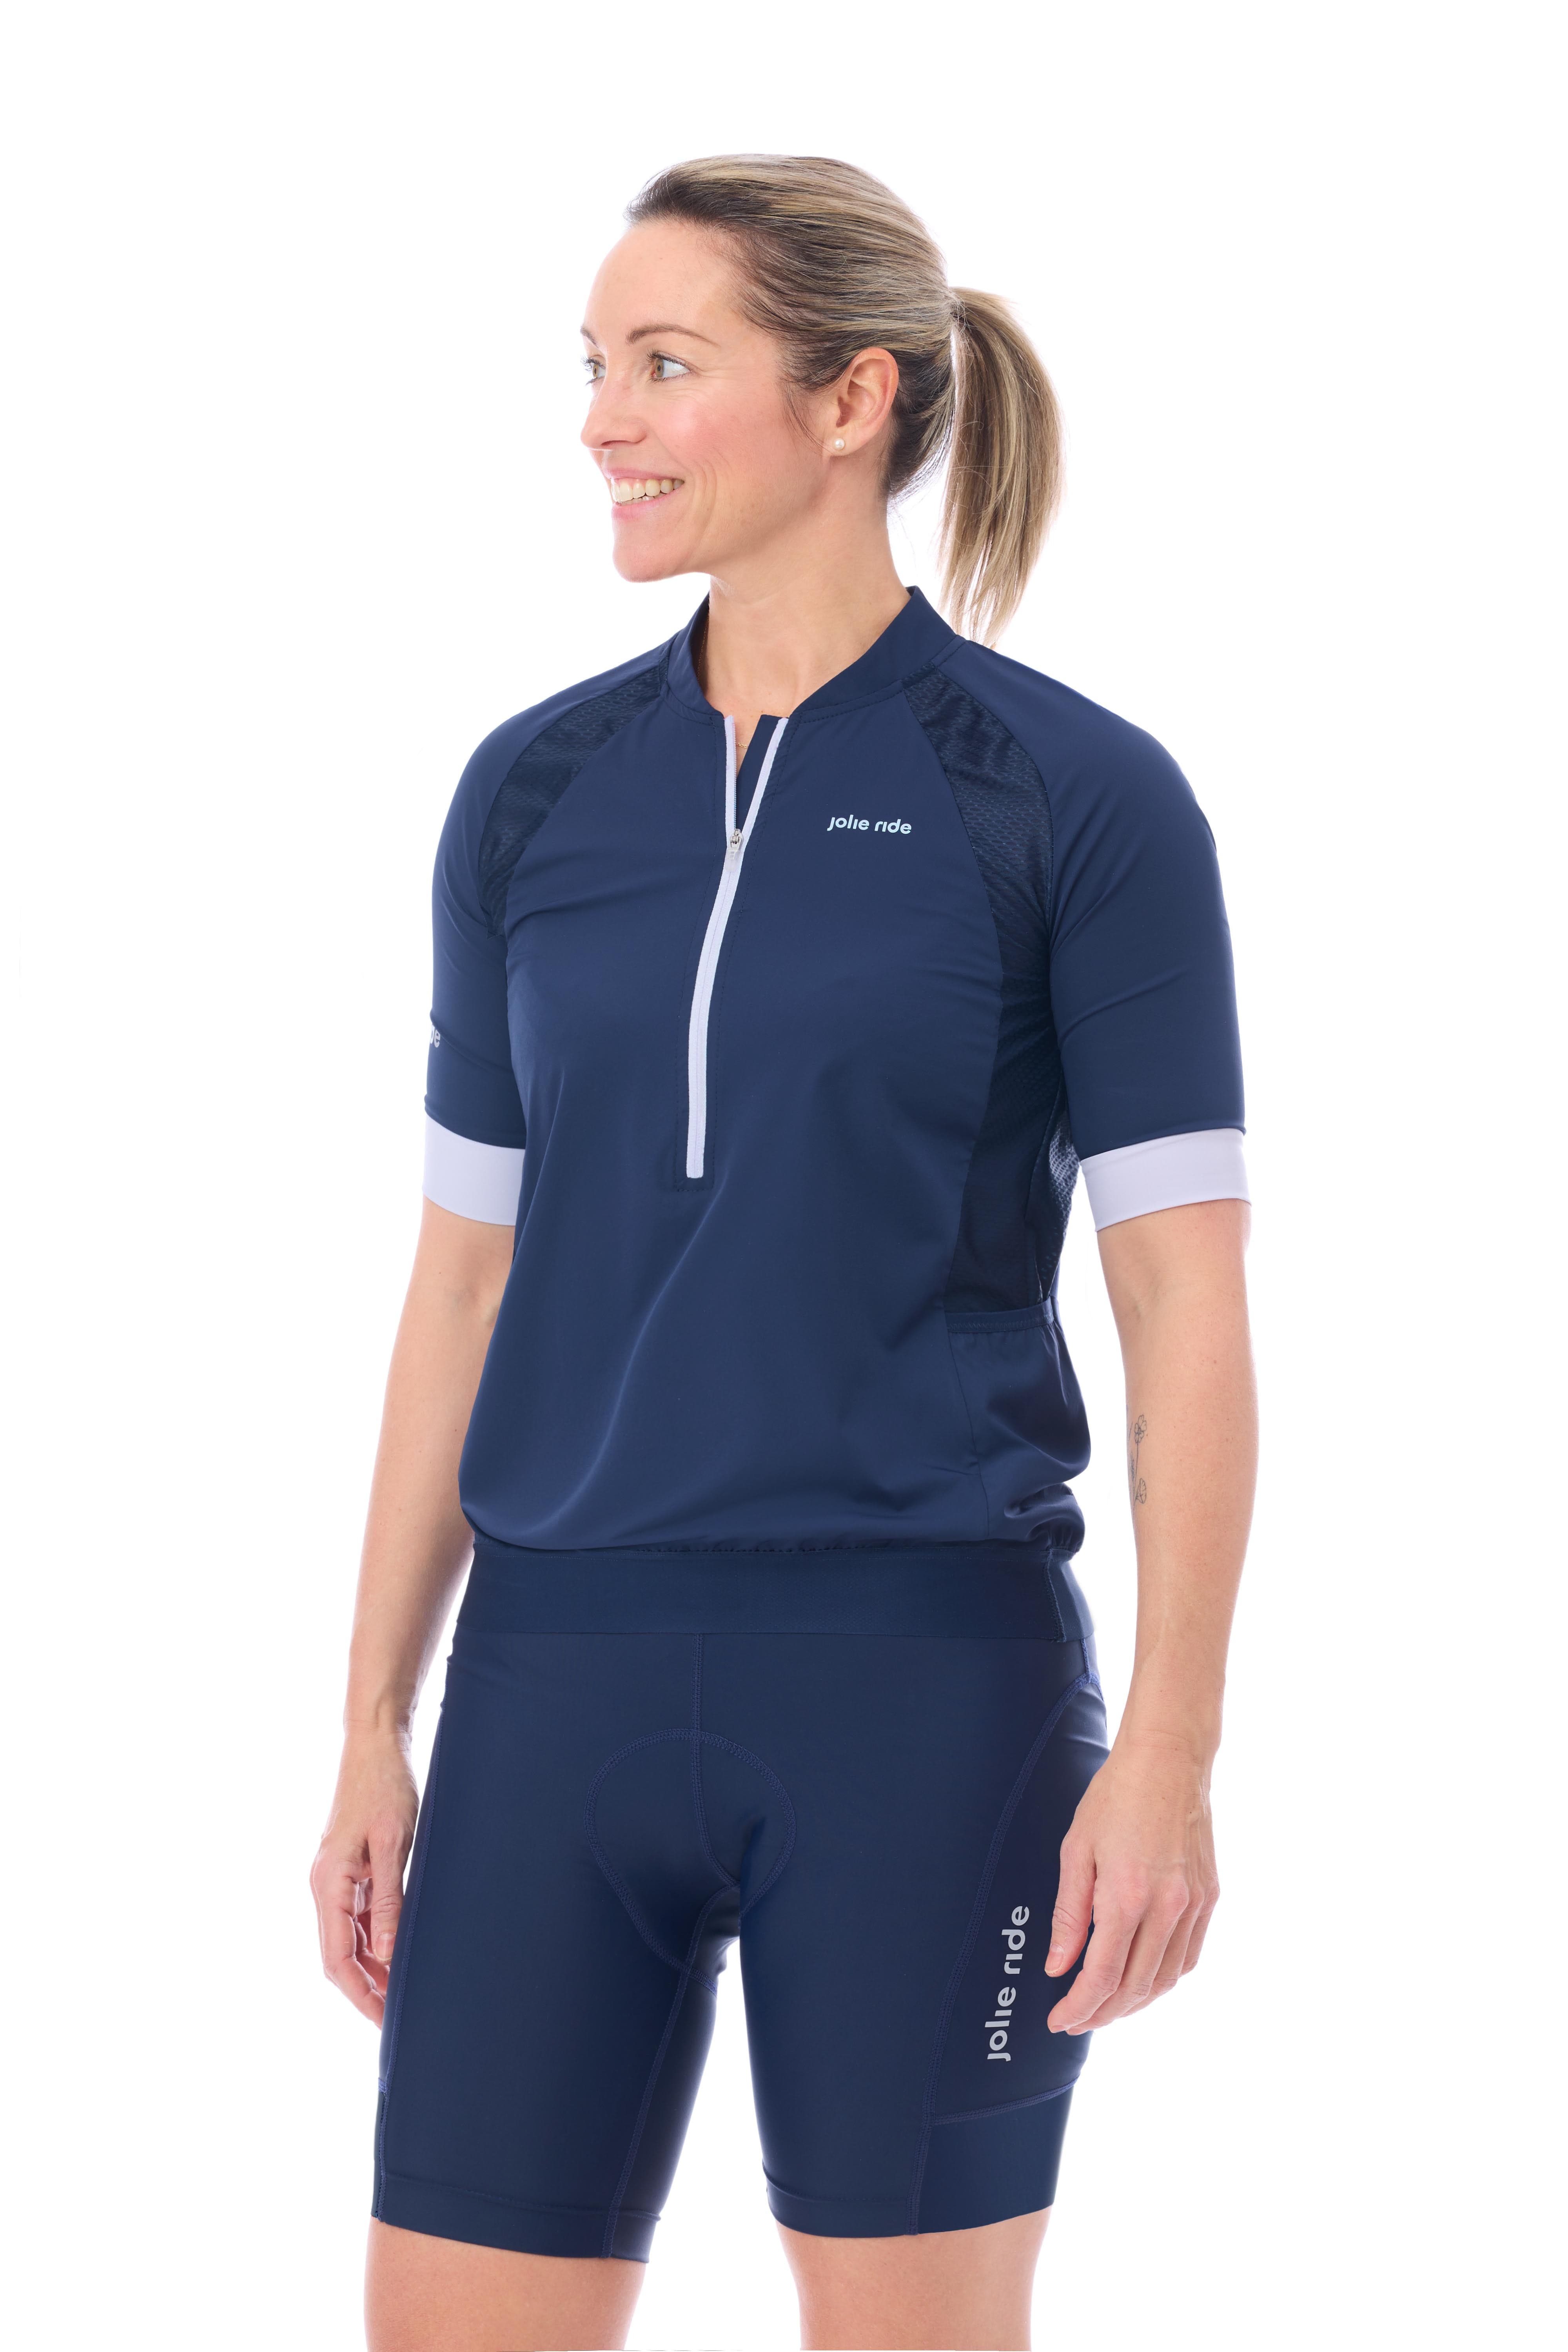 JolieRide Jersey loose fit cycling jersey with UV protection and storage pockets